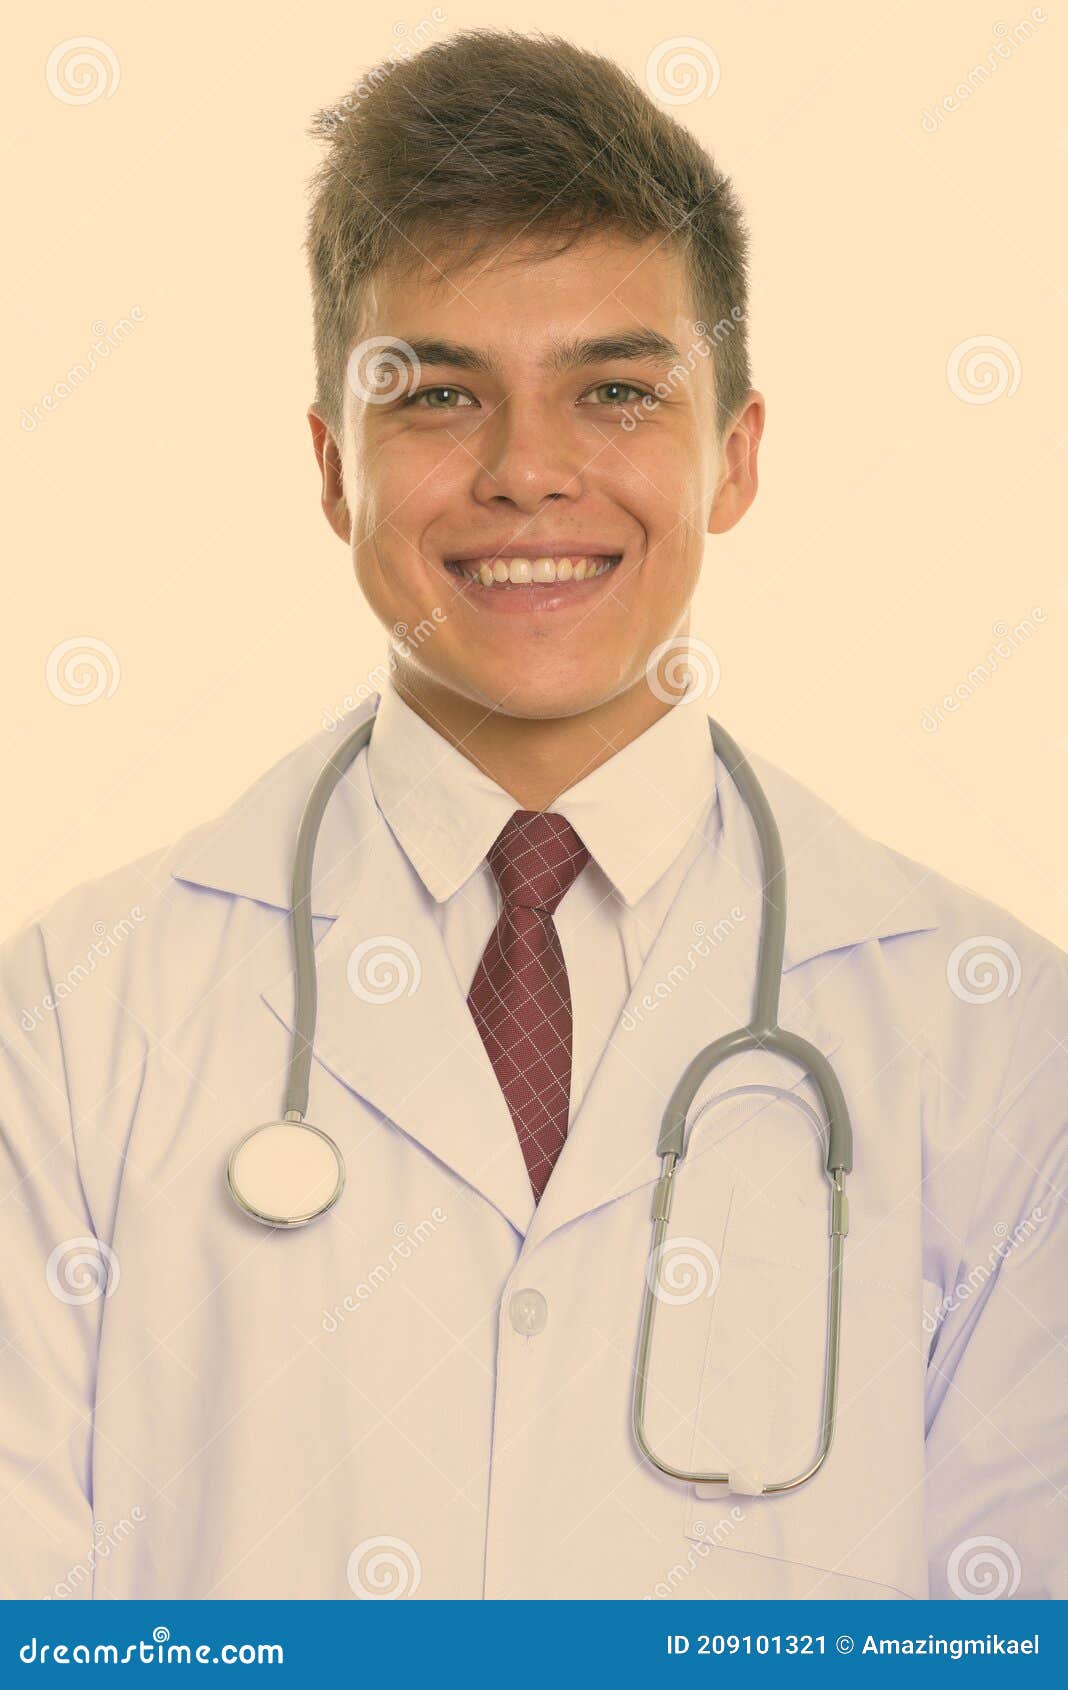 Studio Shot of Young Happy Man Doctor Smiling Stock Image - Image of ...